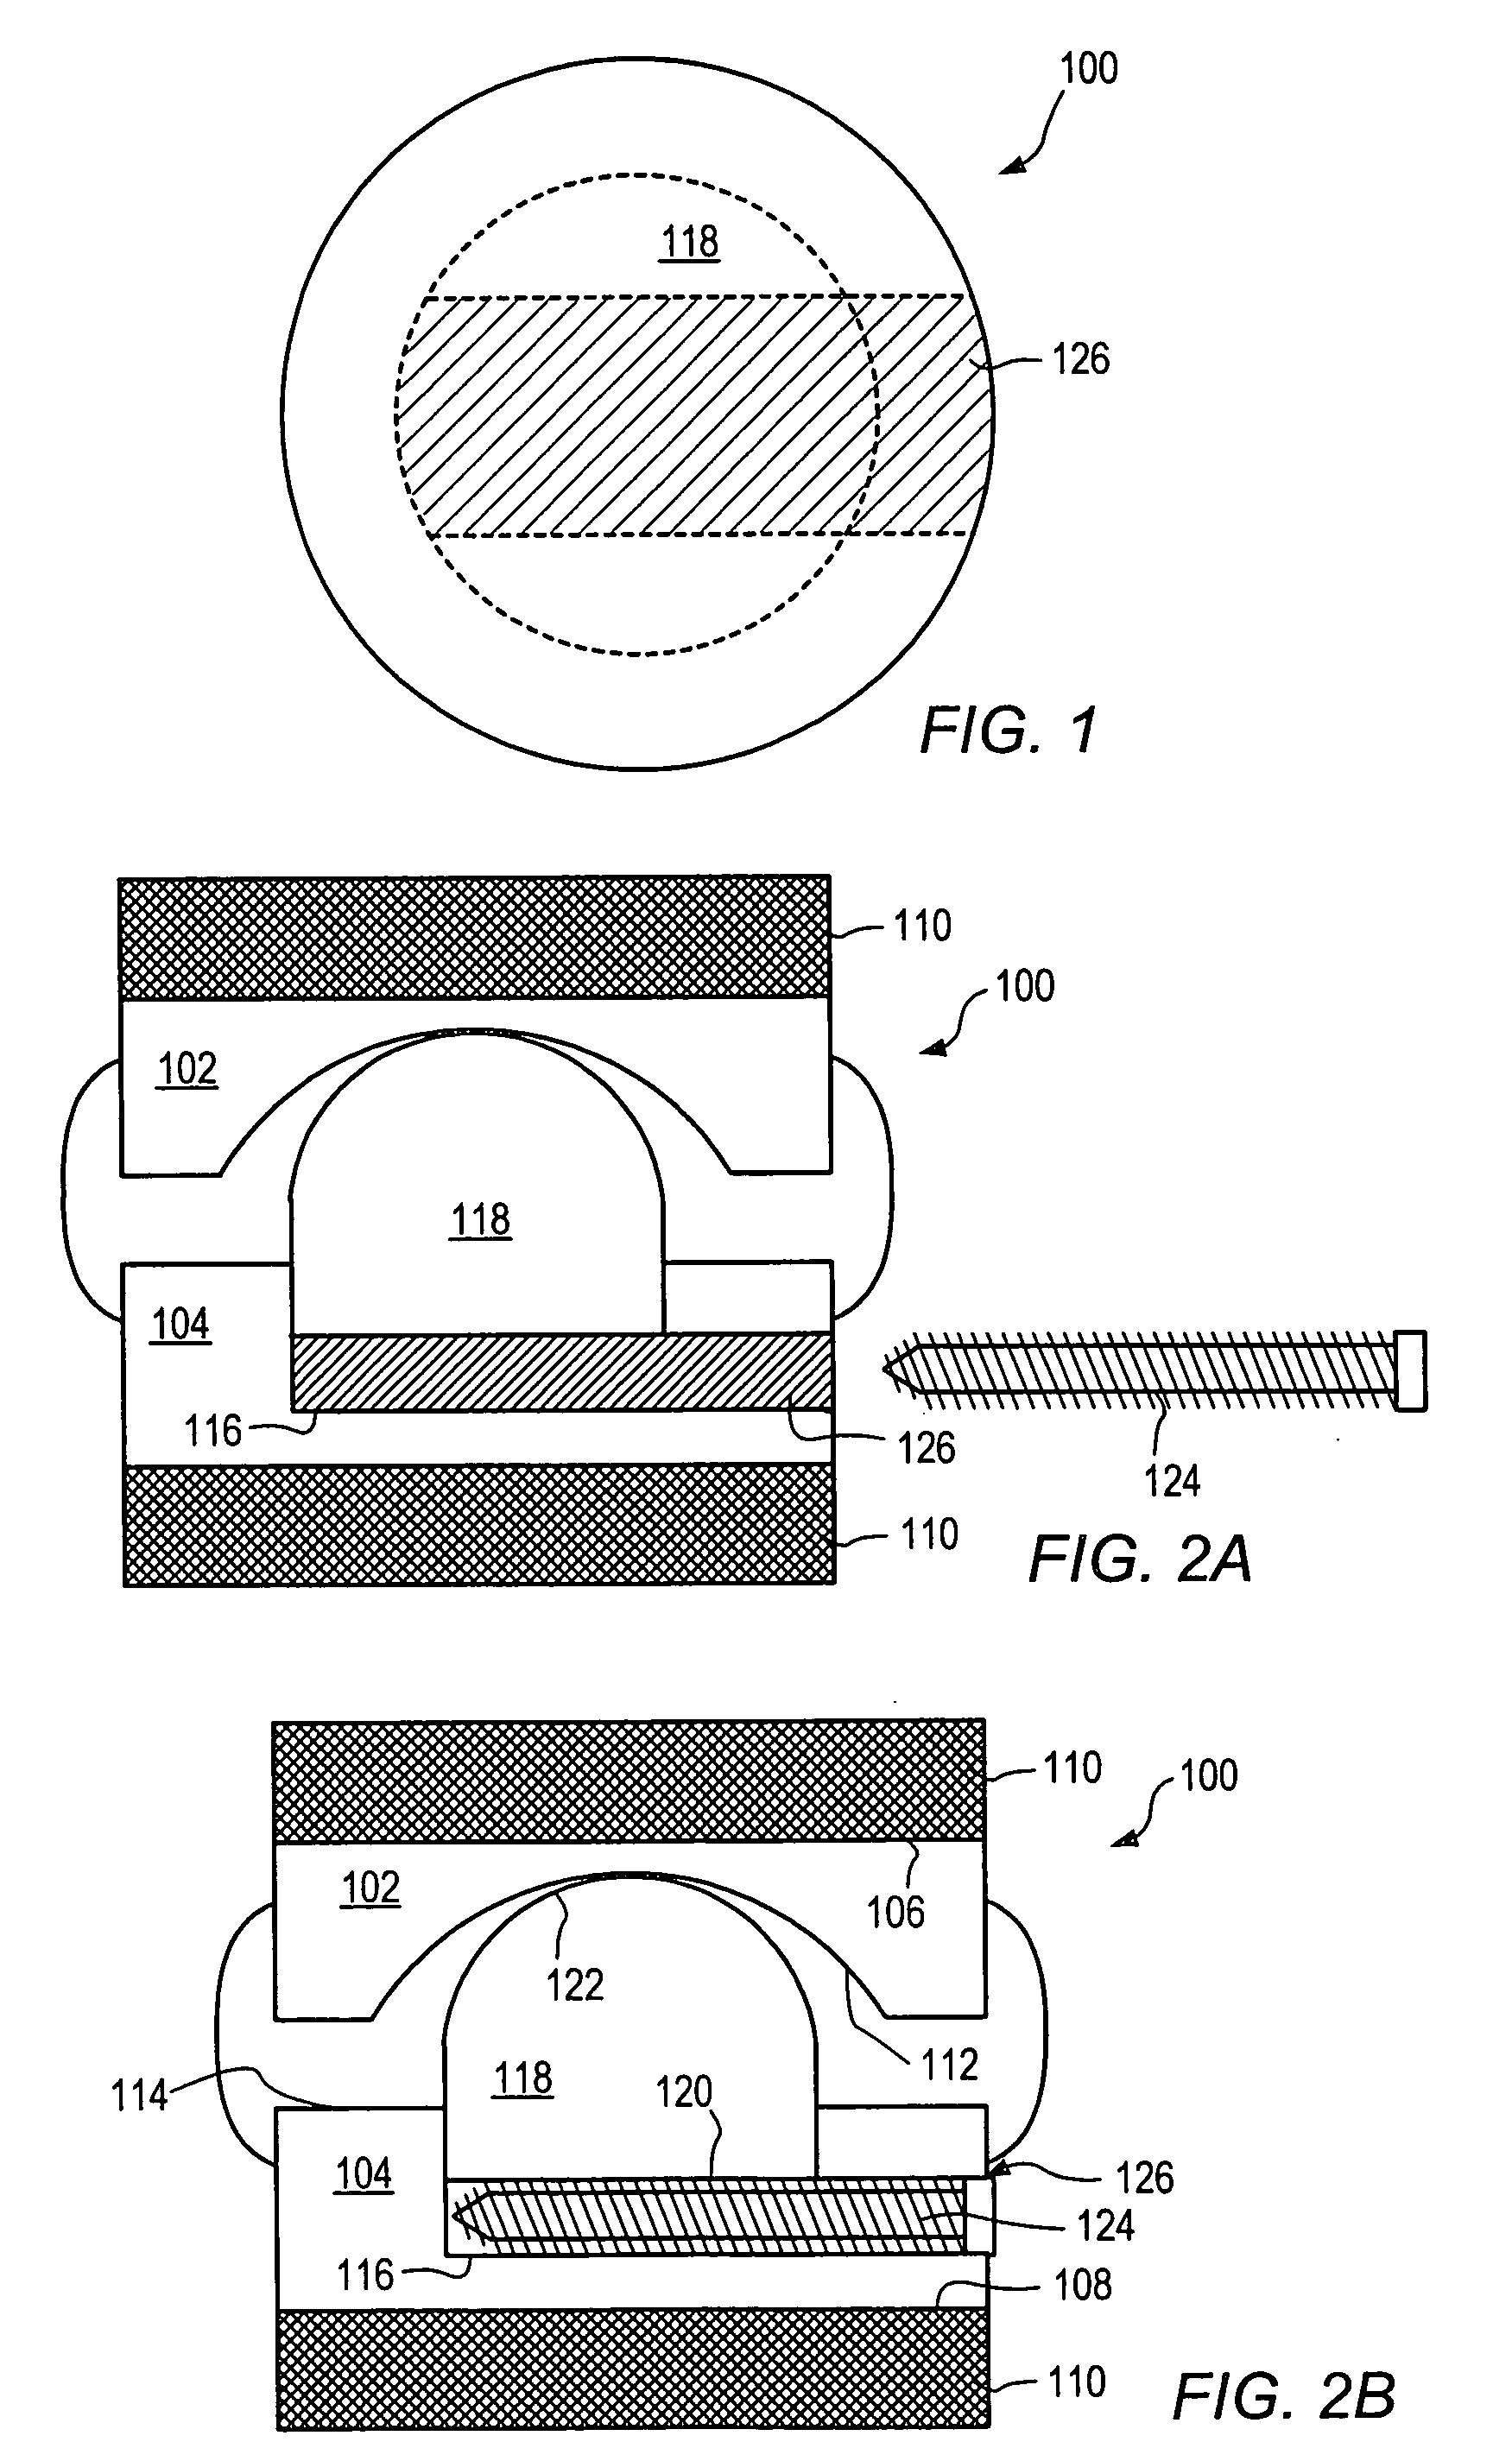 Method of inserting an expandable intervertebral implant without overdistraction